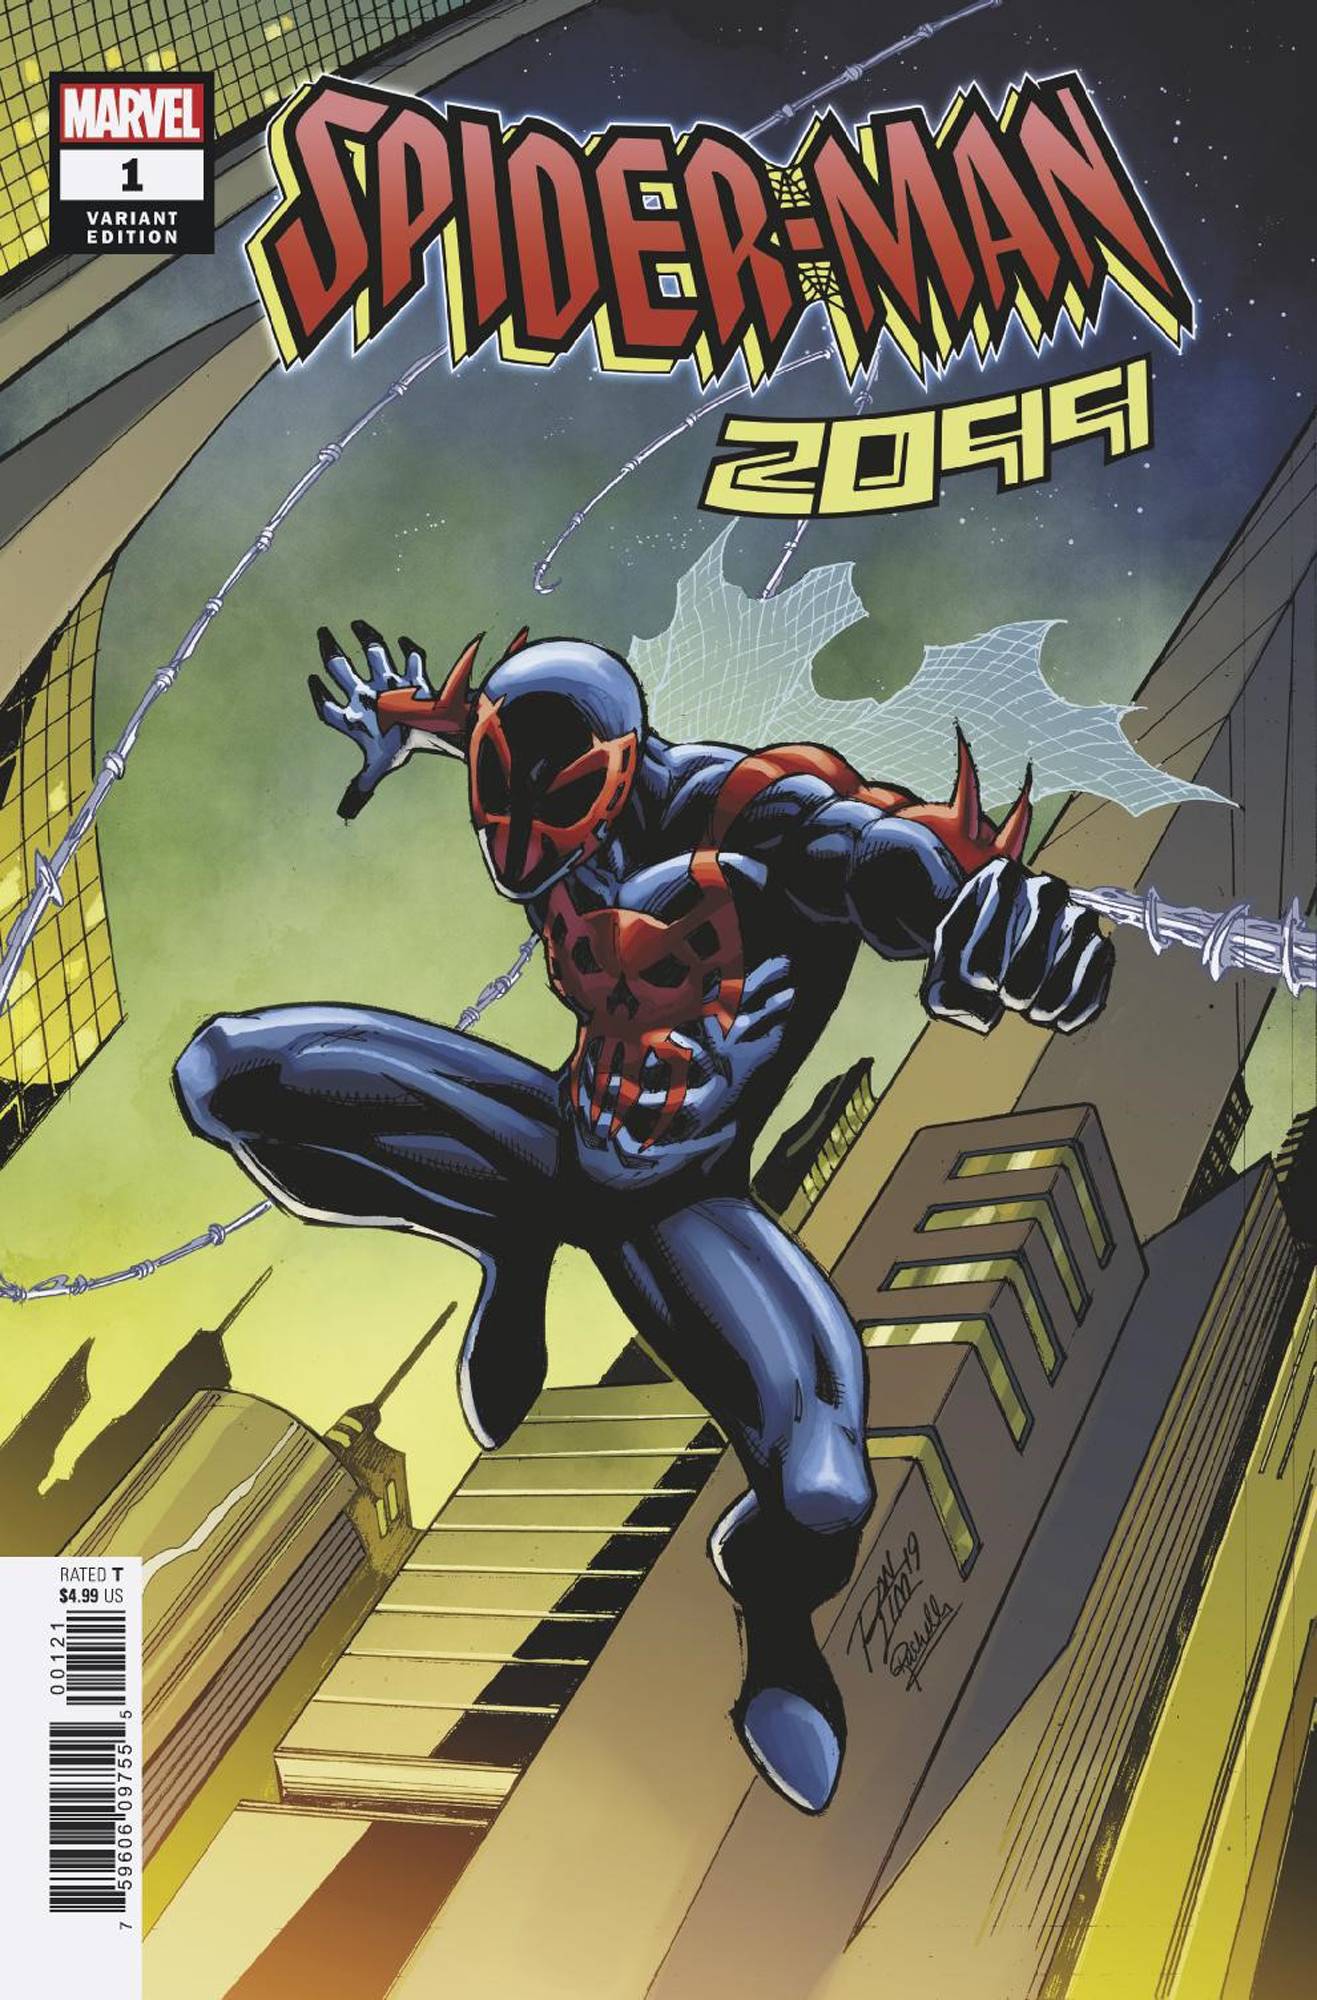 Spider-Man 2099 1 - Heroes Cave